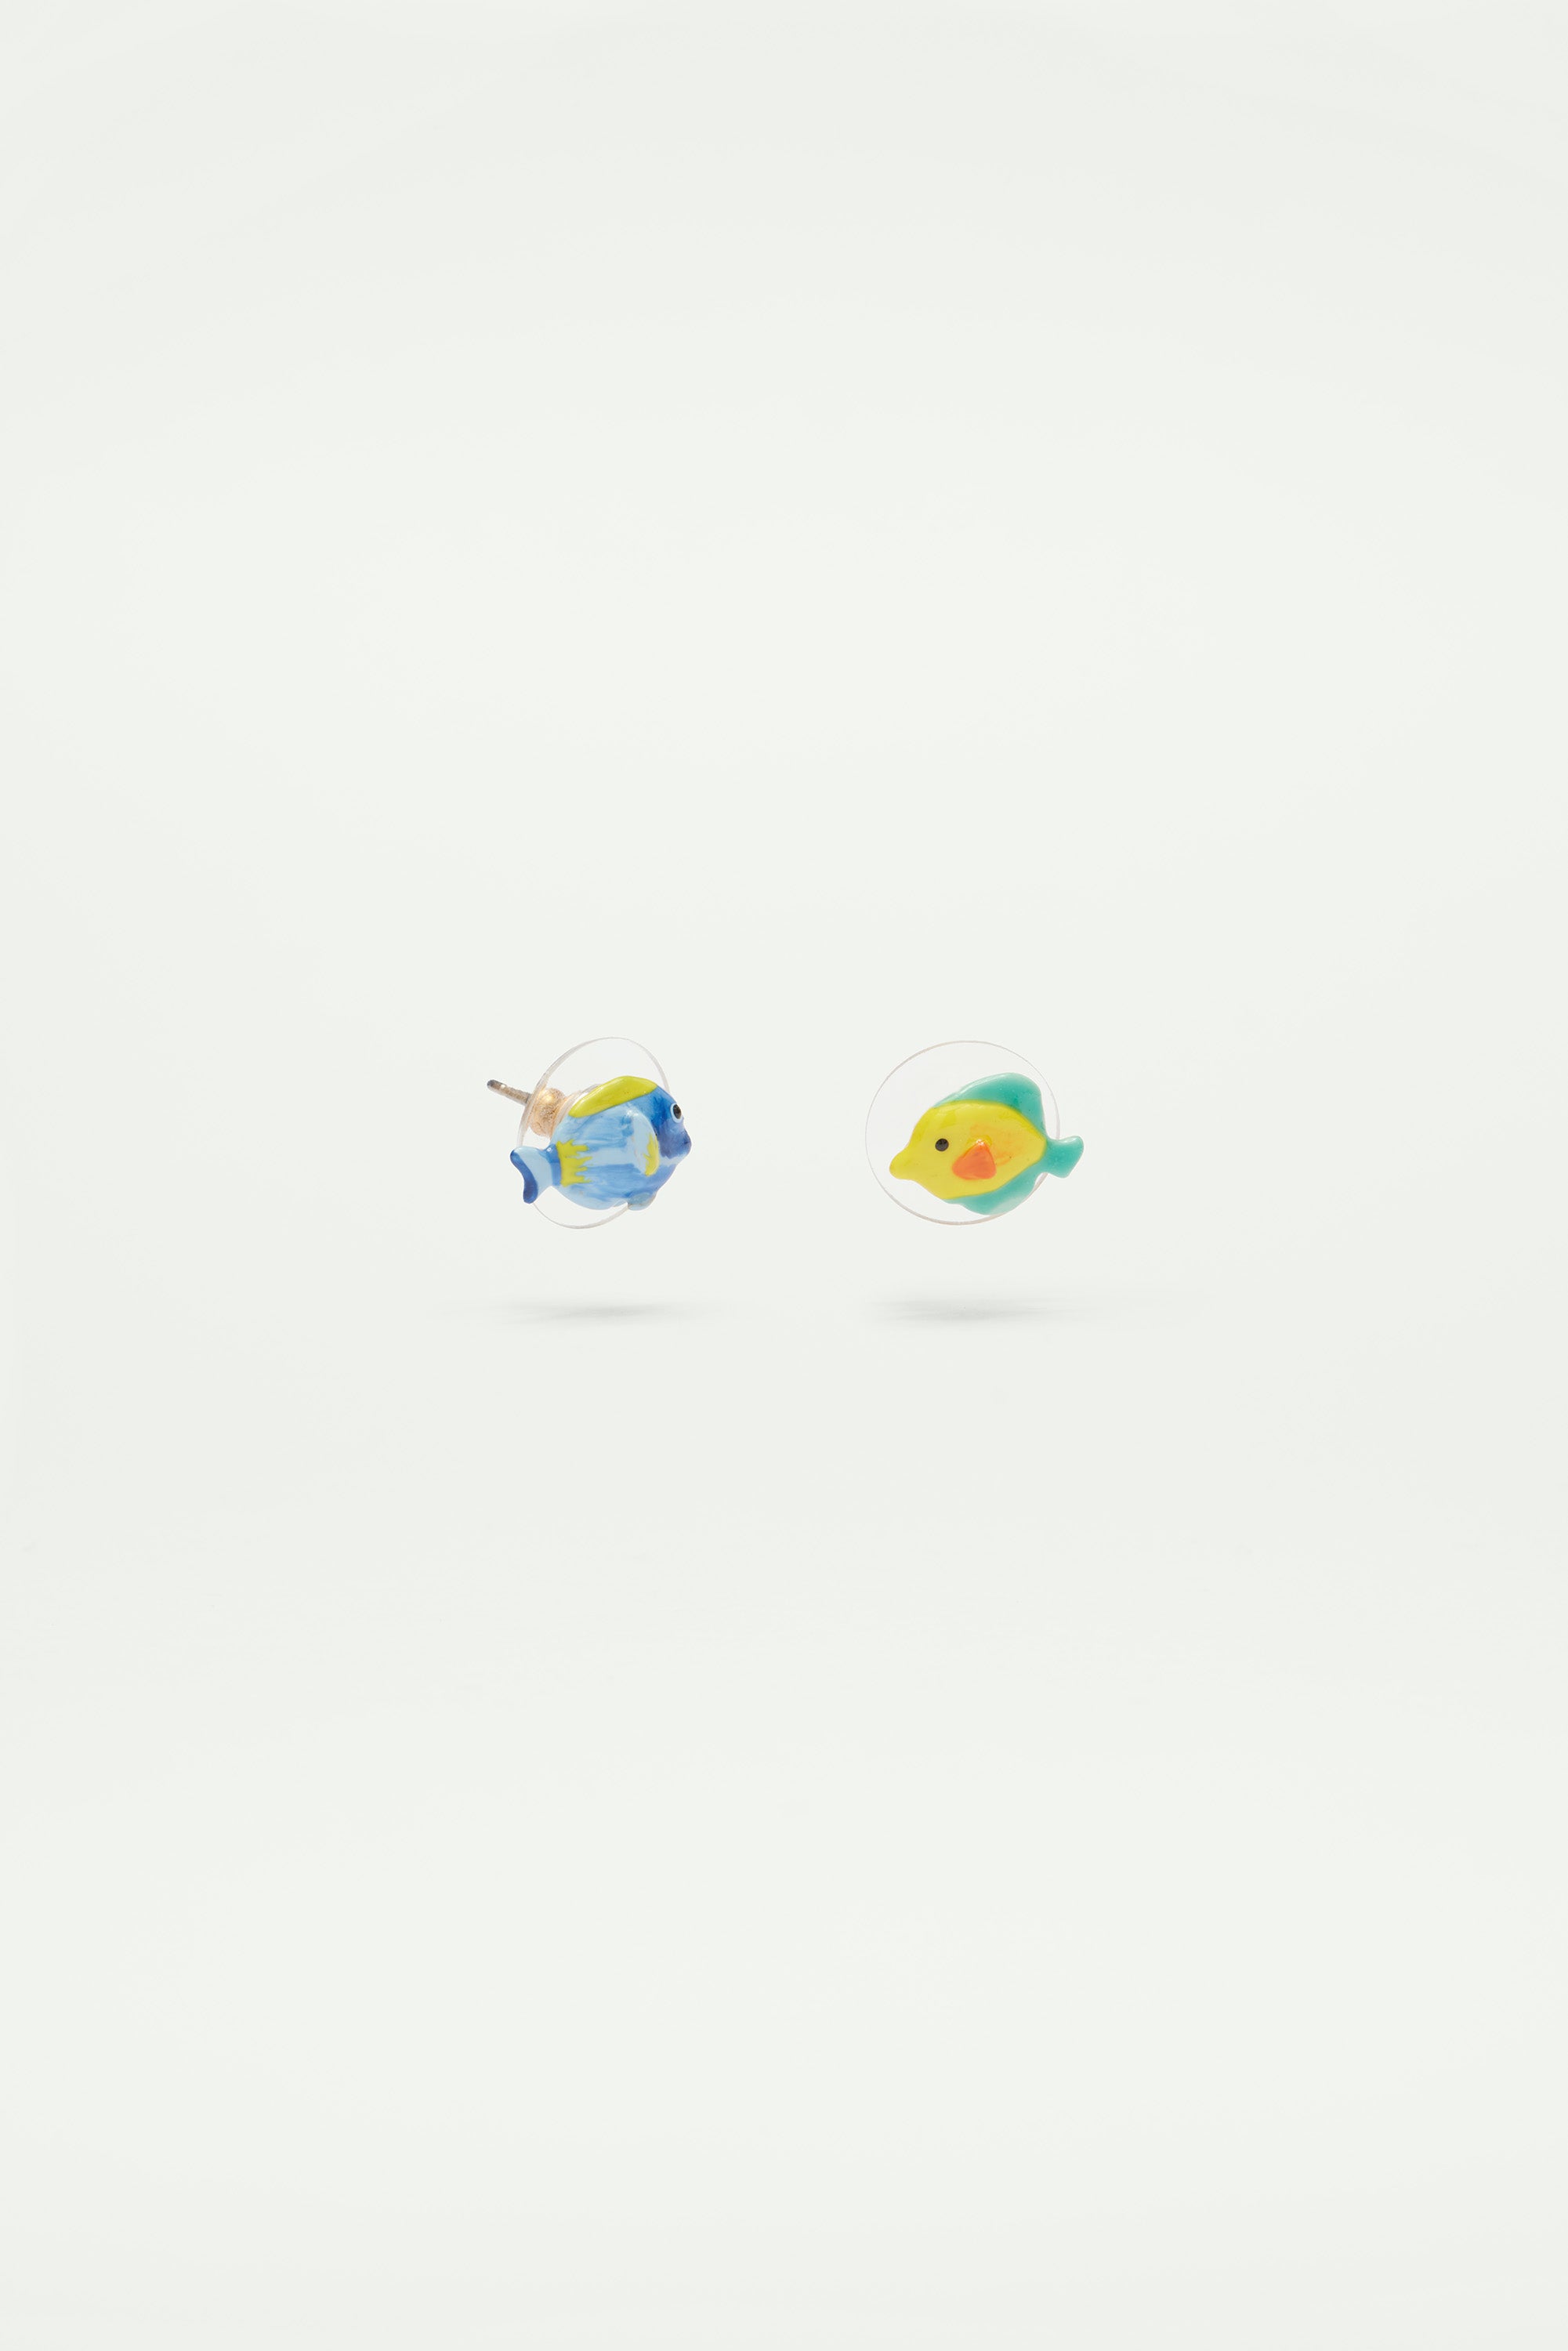 Asymmetrical blue fish and yellow fish post earrings